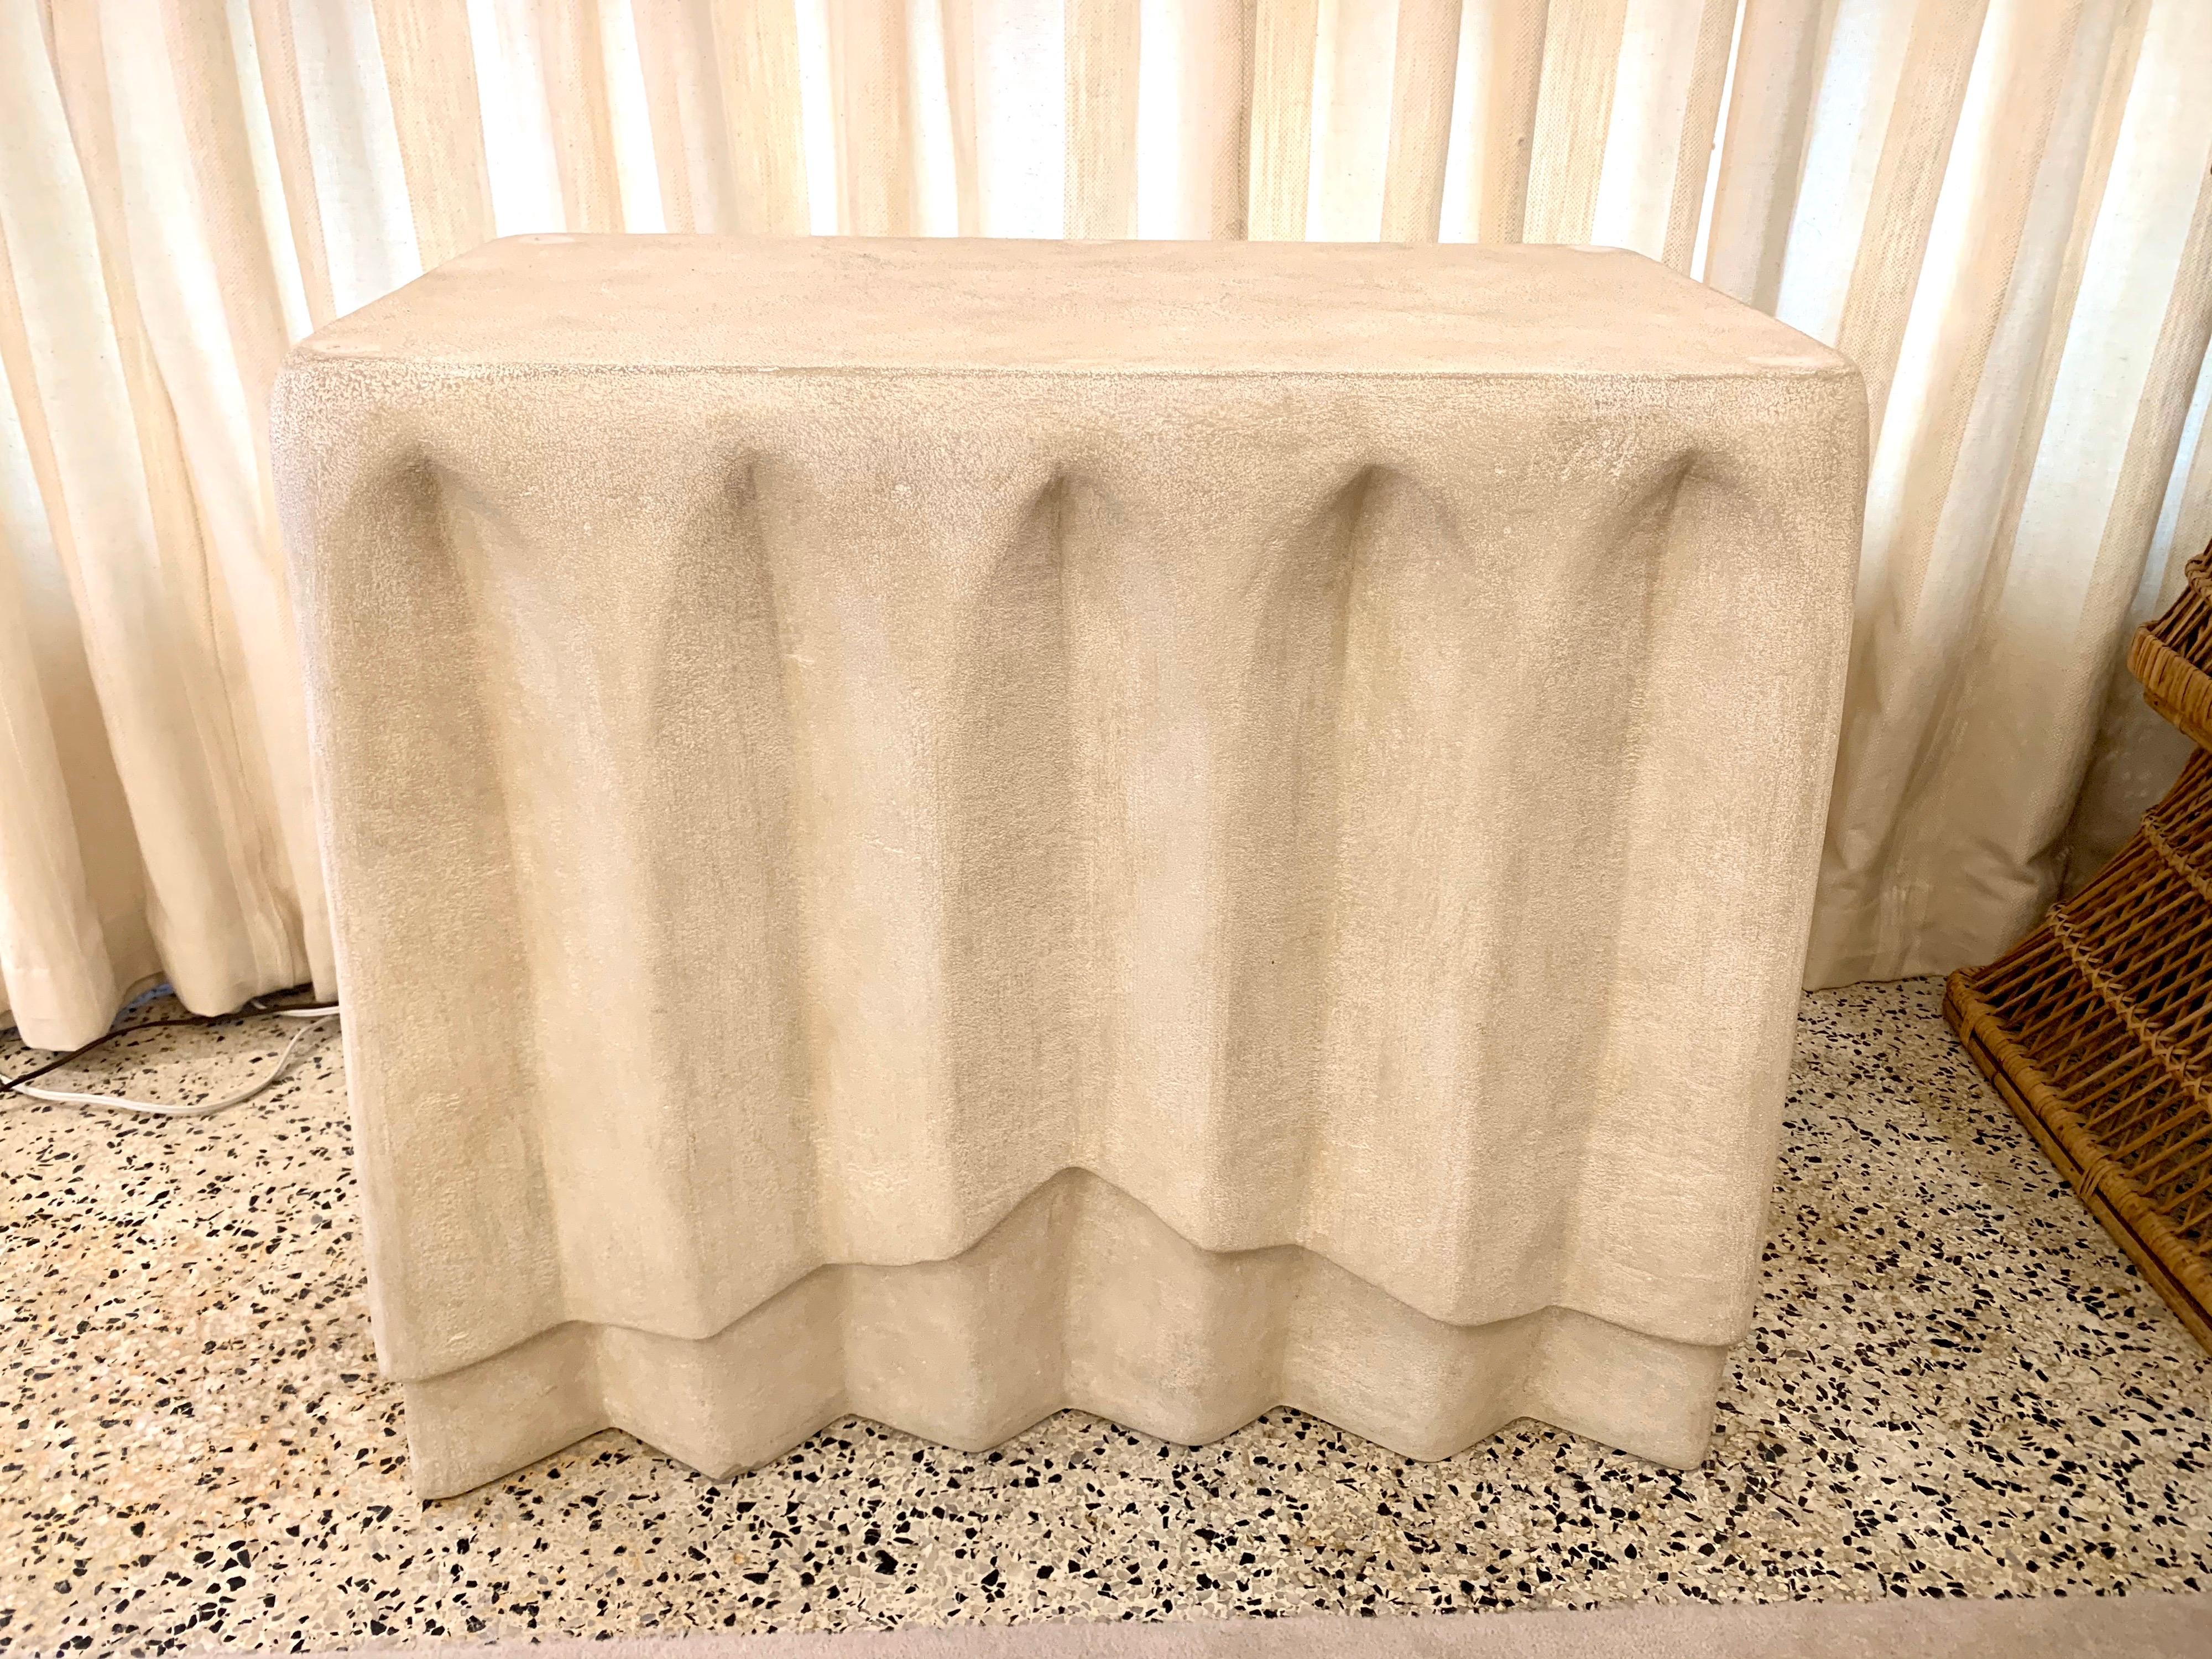 A rarely found, this vintage cast plaster console appears to be draped in fabric - mimicking a neoclassical English design. Natural color/slightly beige in tone from circa 1960s.